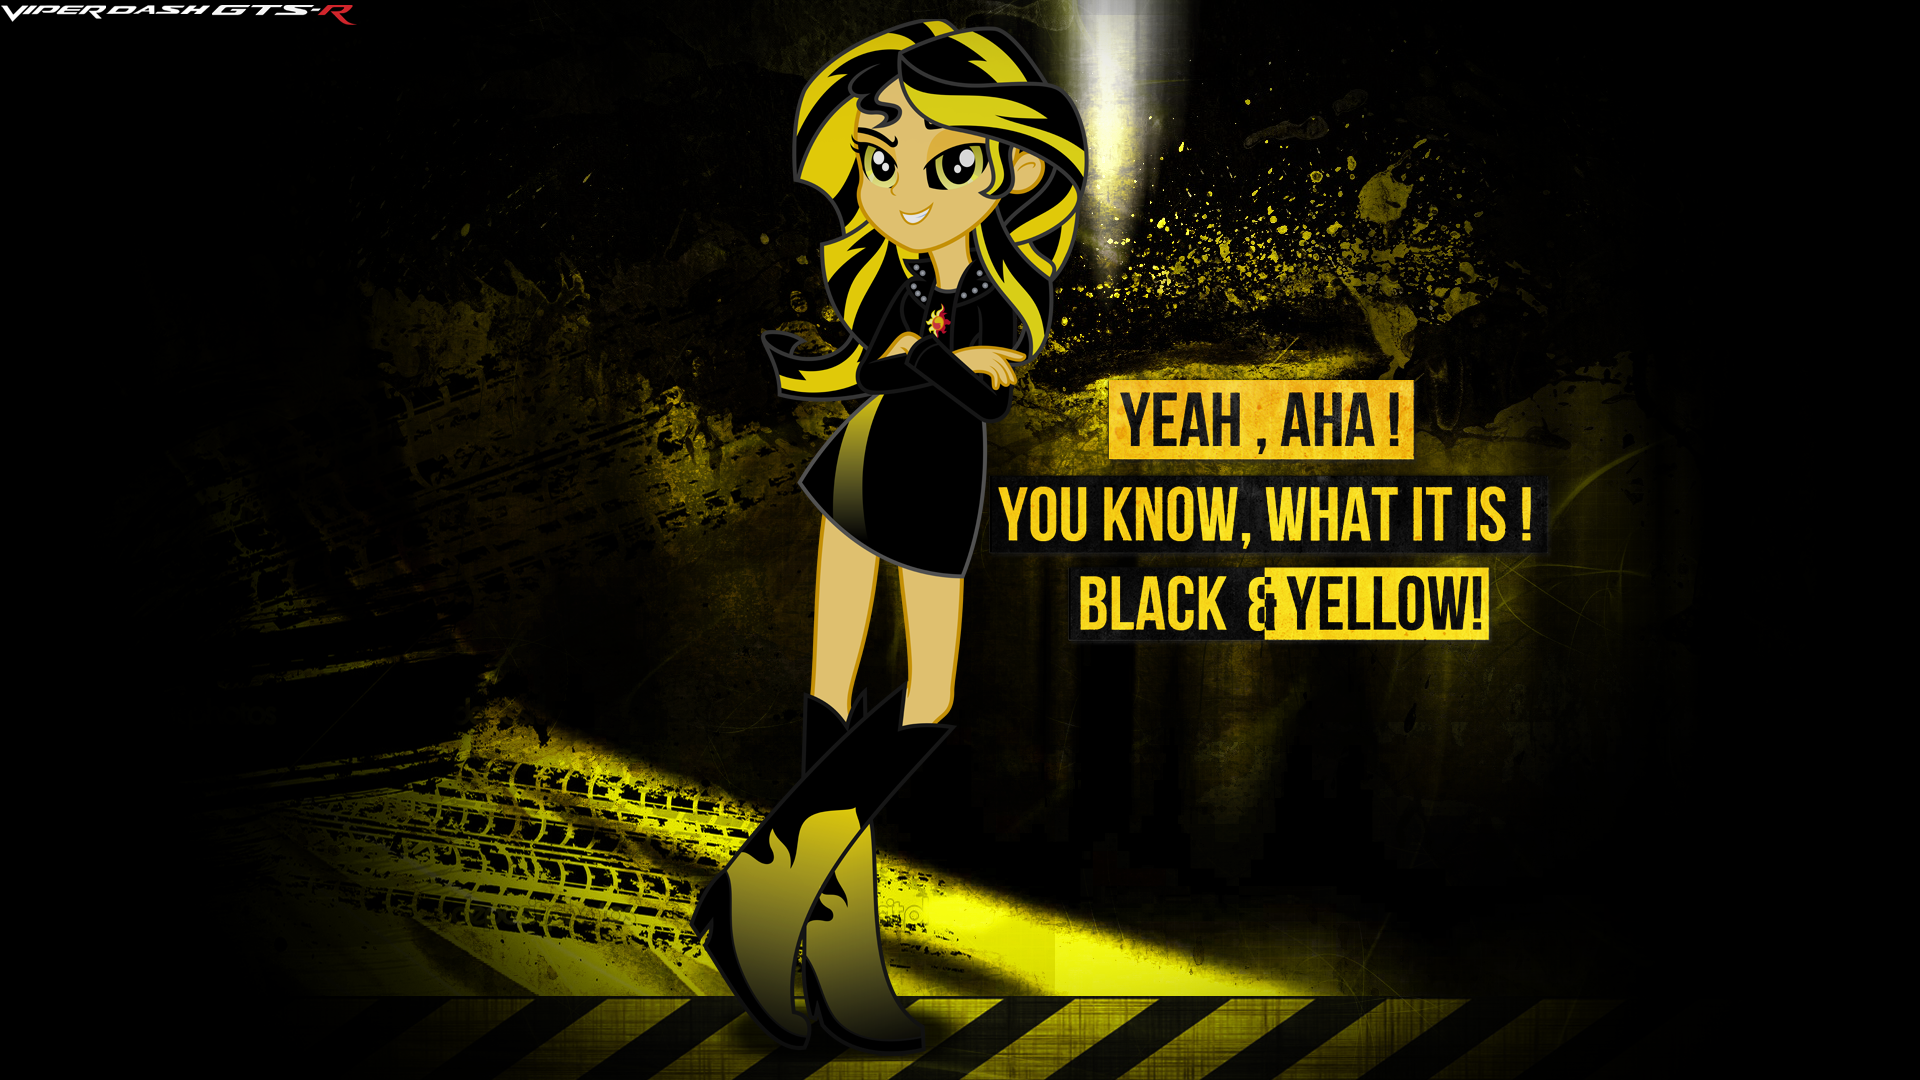 Black And Yellow Sunset Shimmer Wallpaper By Viperdash Gfx On